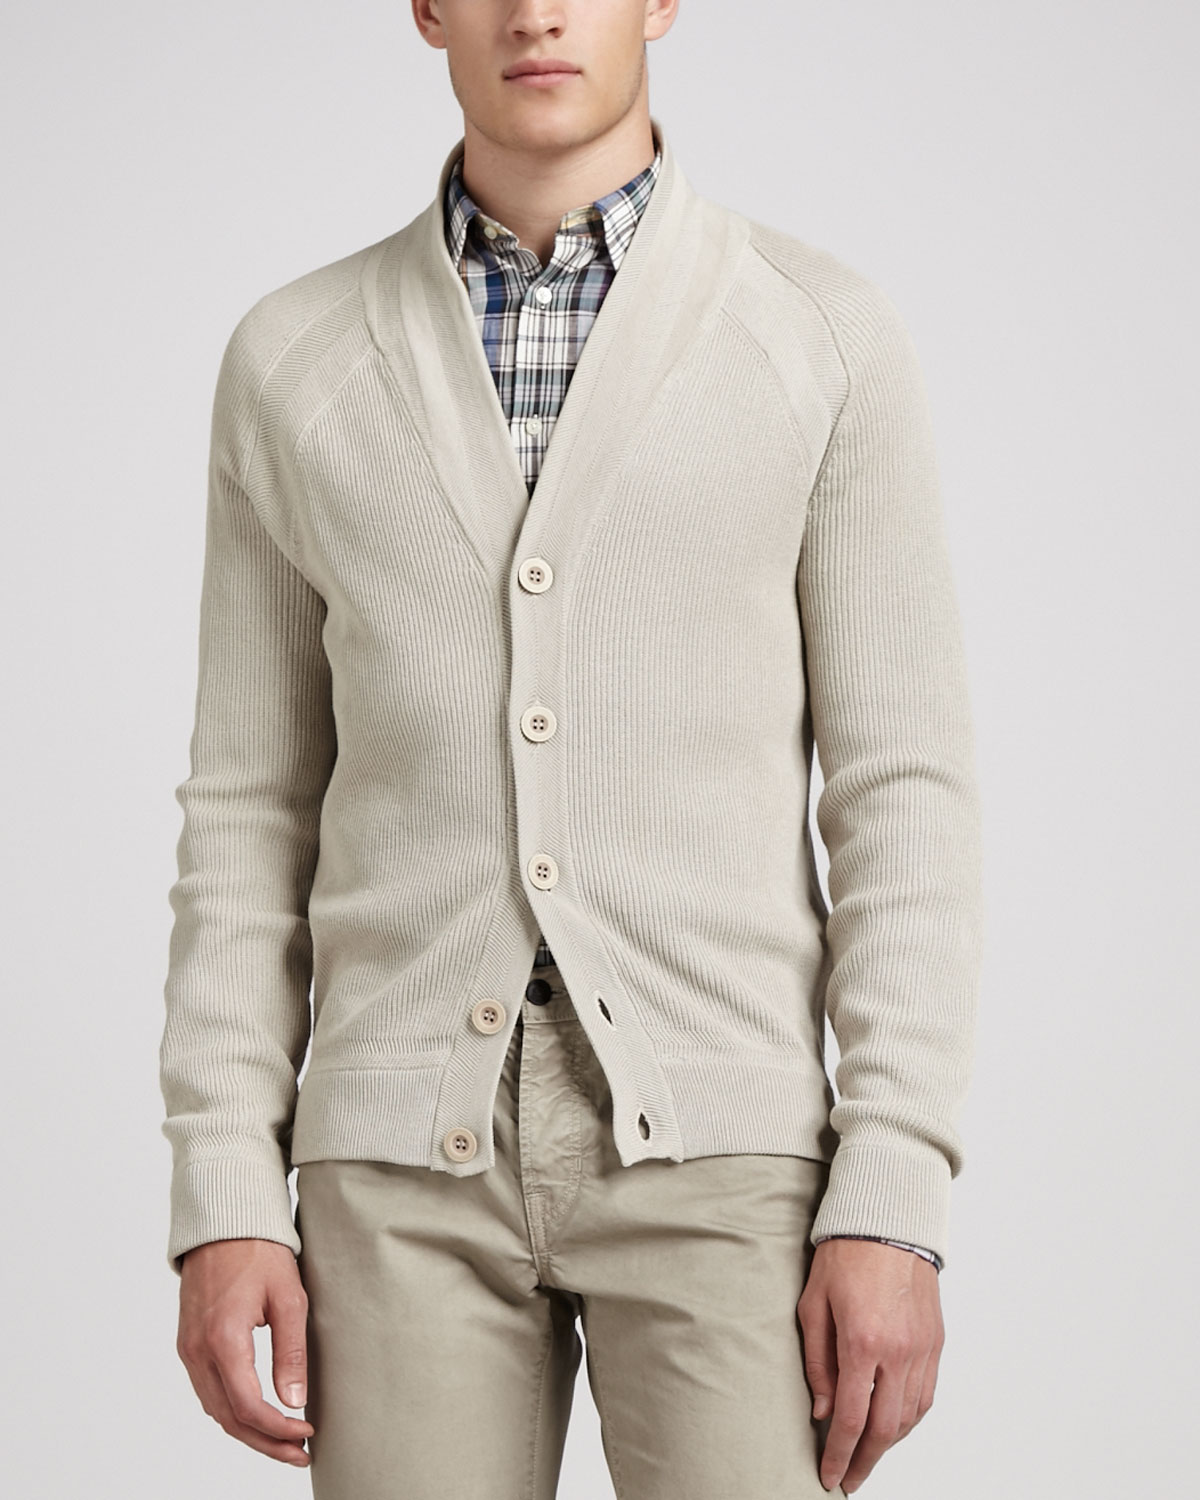 Lyst - Vince Ribbed Cotton Cardigan in White for Men